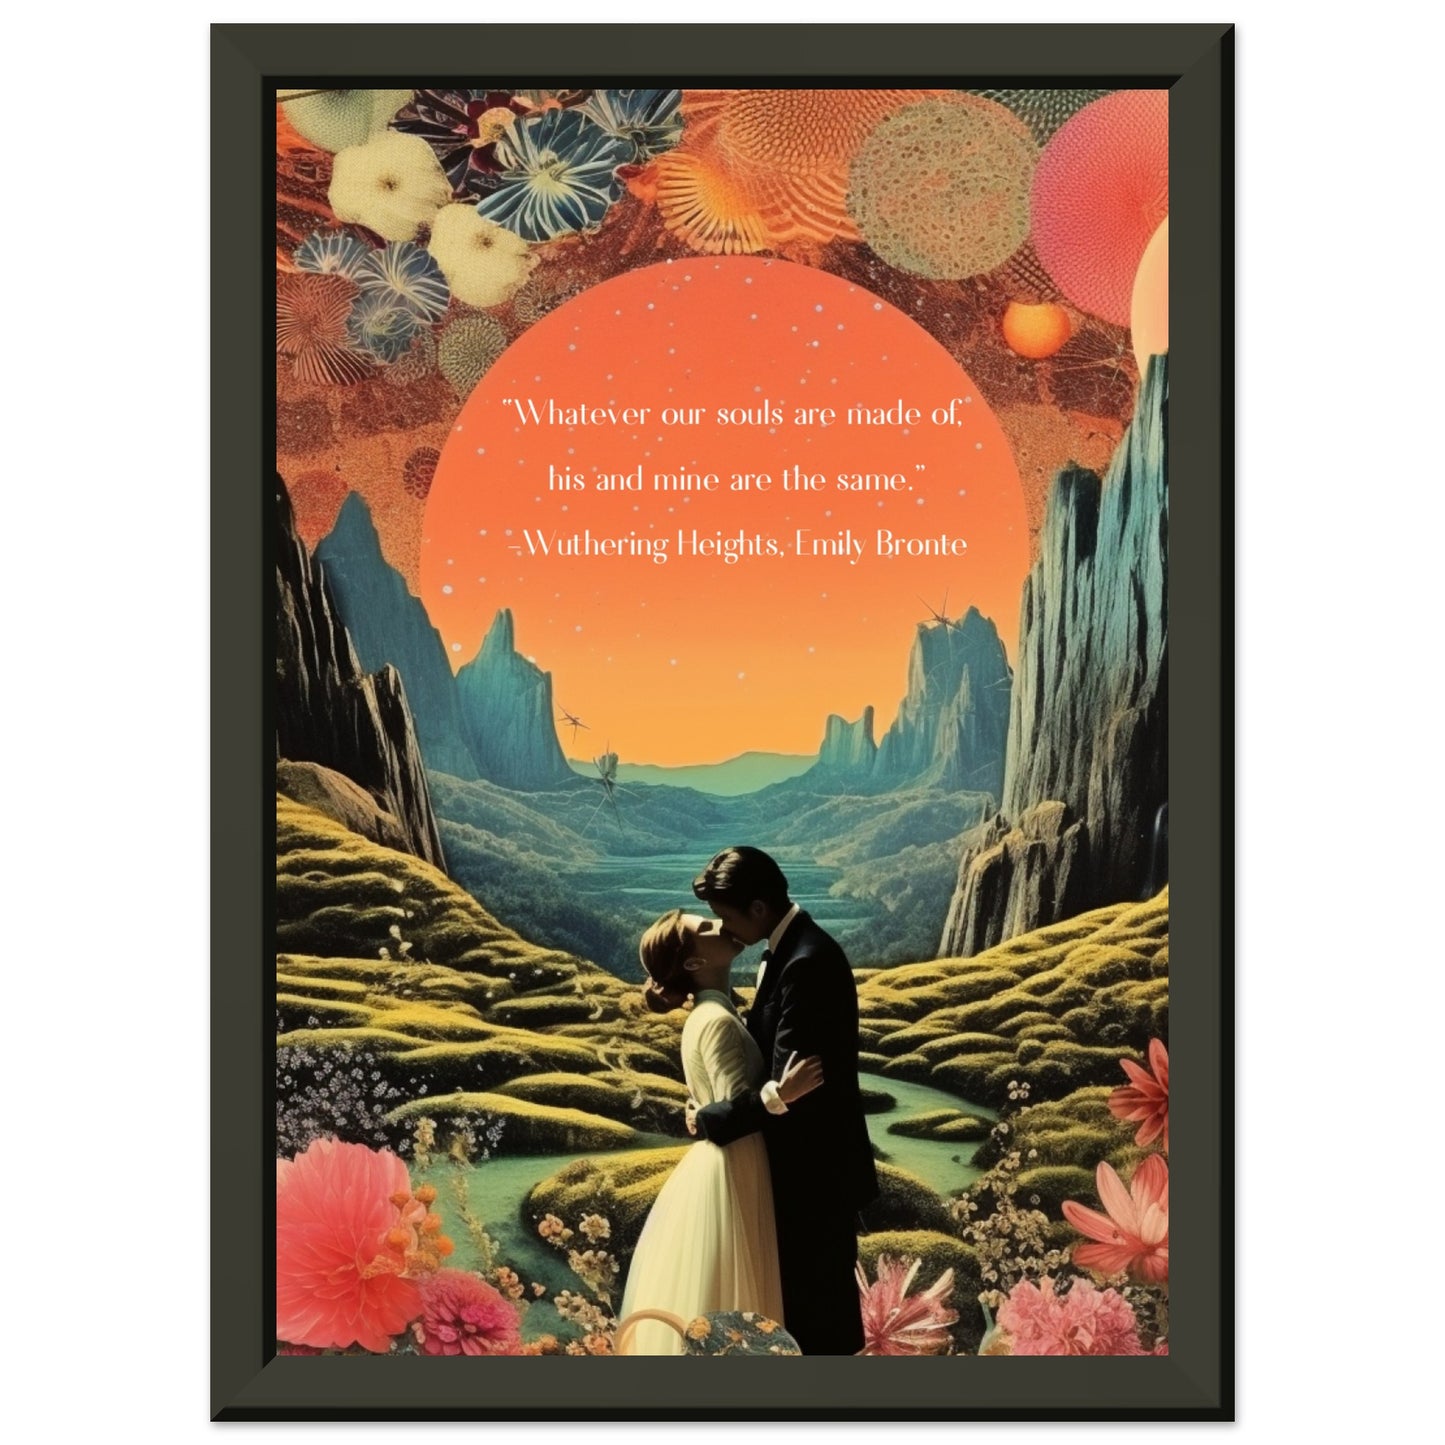 'Whatever our souls", from Wuthering Heights by Emily Bronte quote, Framed Wall Art